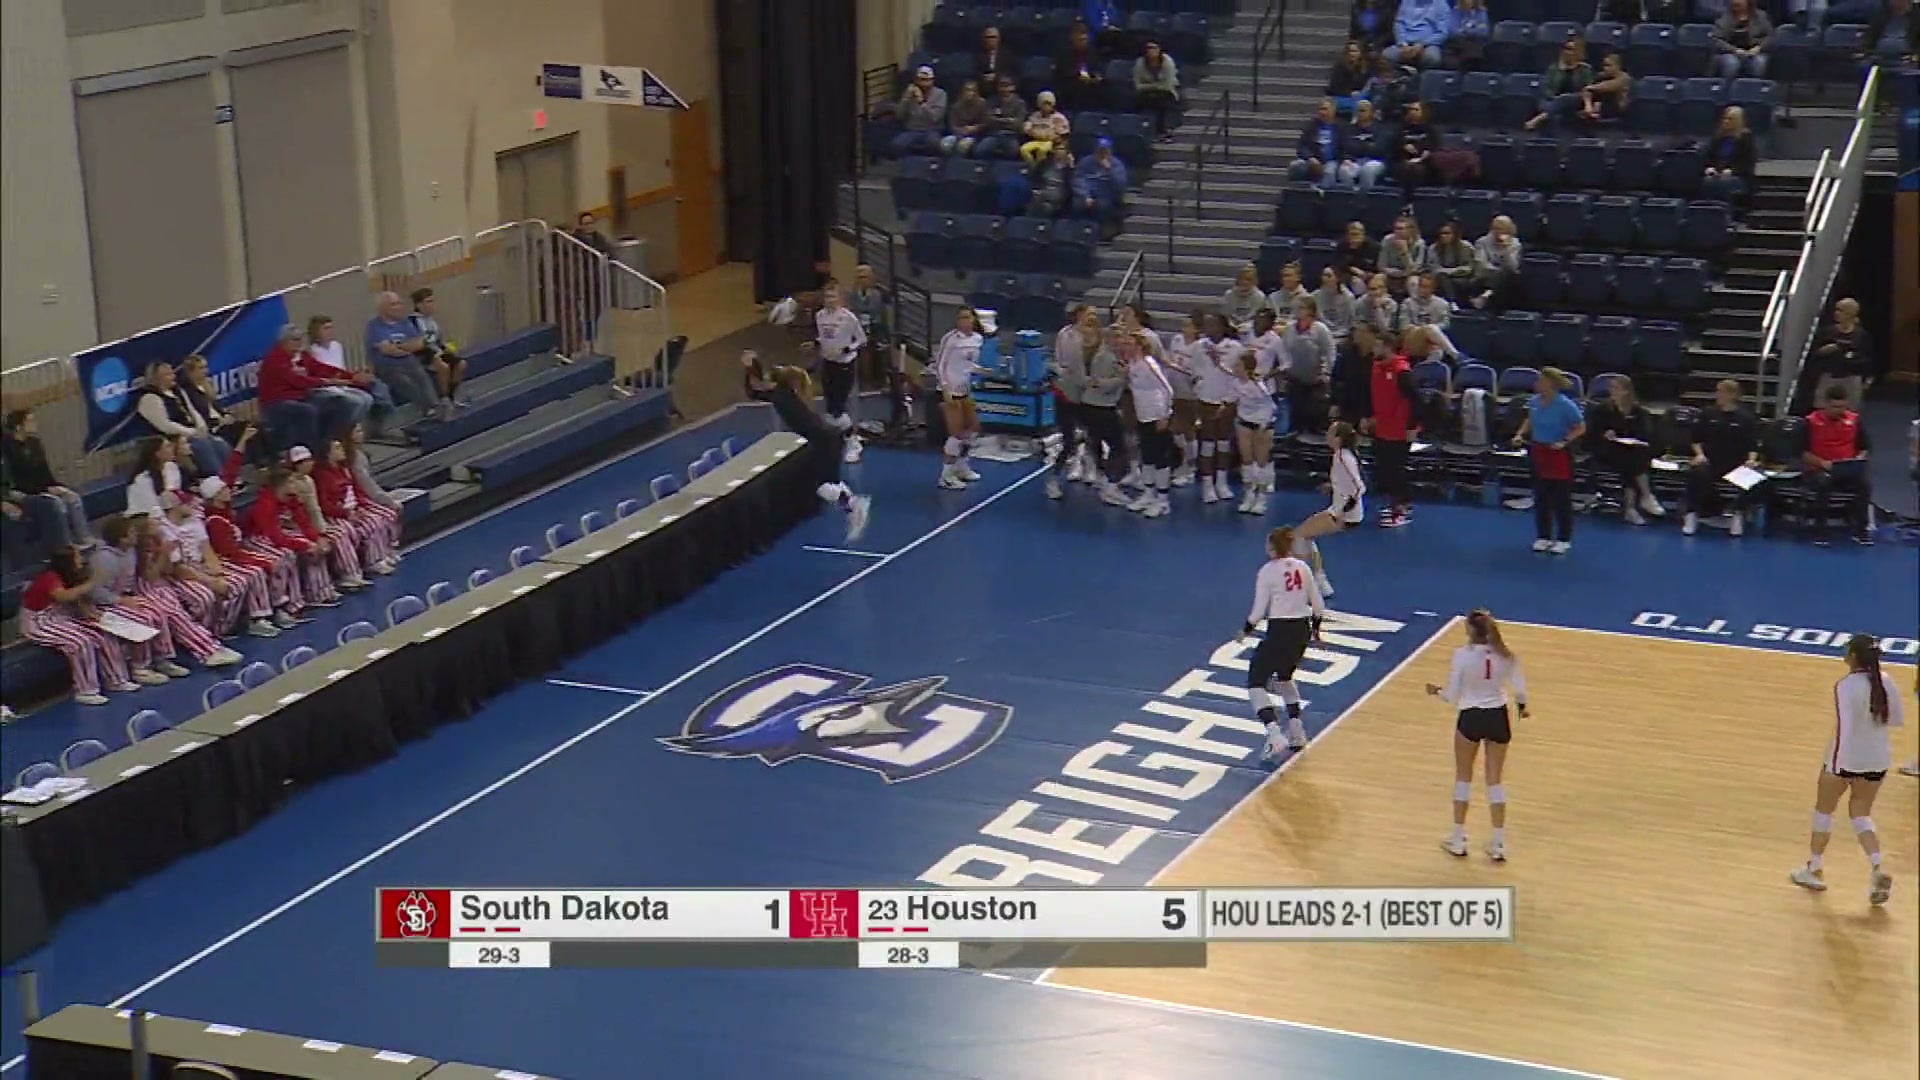 Volleyball player dives into table. Blue court, table is press row but empty. South Dakota 1 point vs Houston 5 points Houston leads 1-2 (Best of 5)